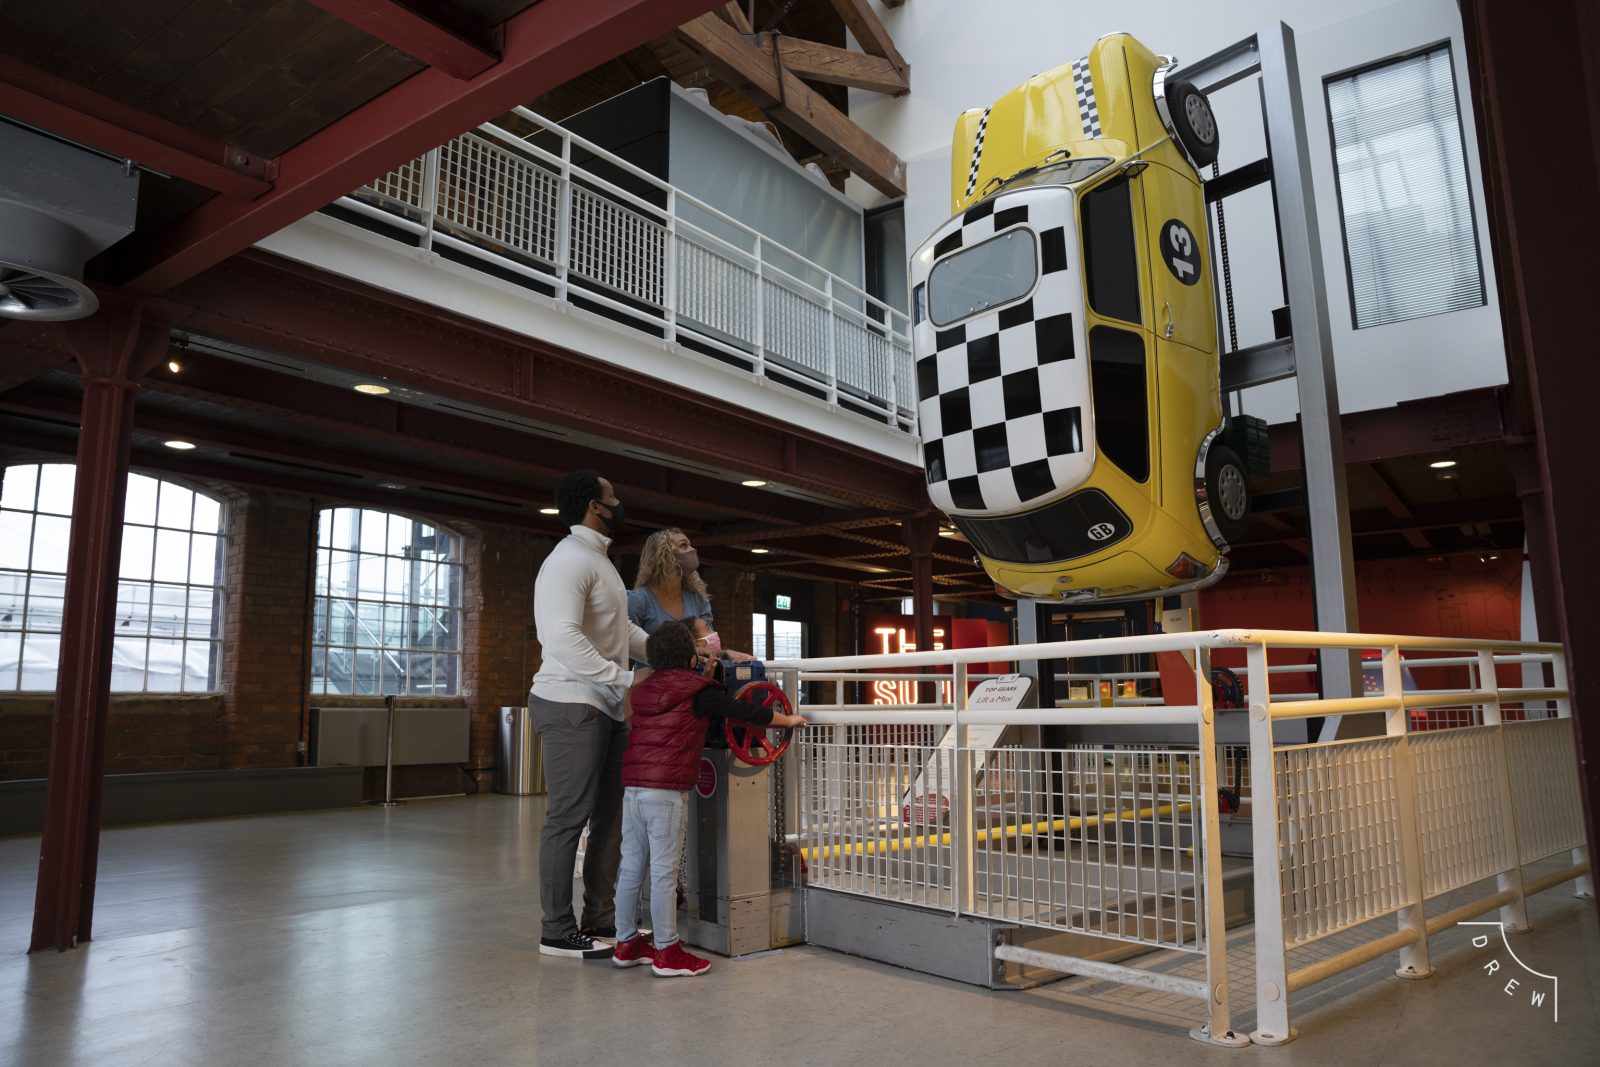 Transport-themed workshops, exhibitions, and more at the Science and Industry Museum this half term, The Manc